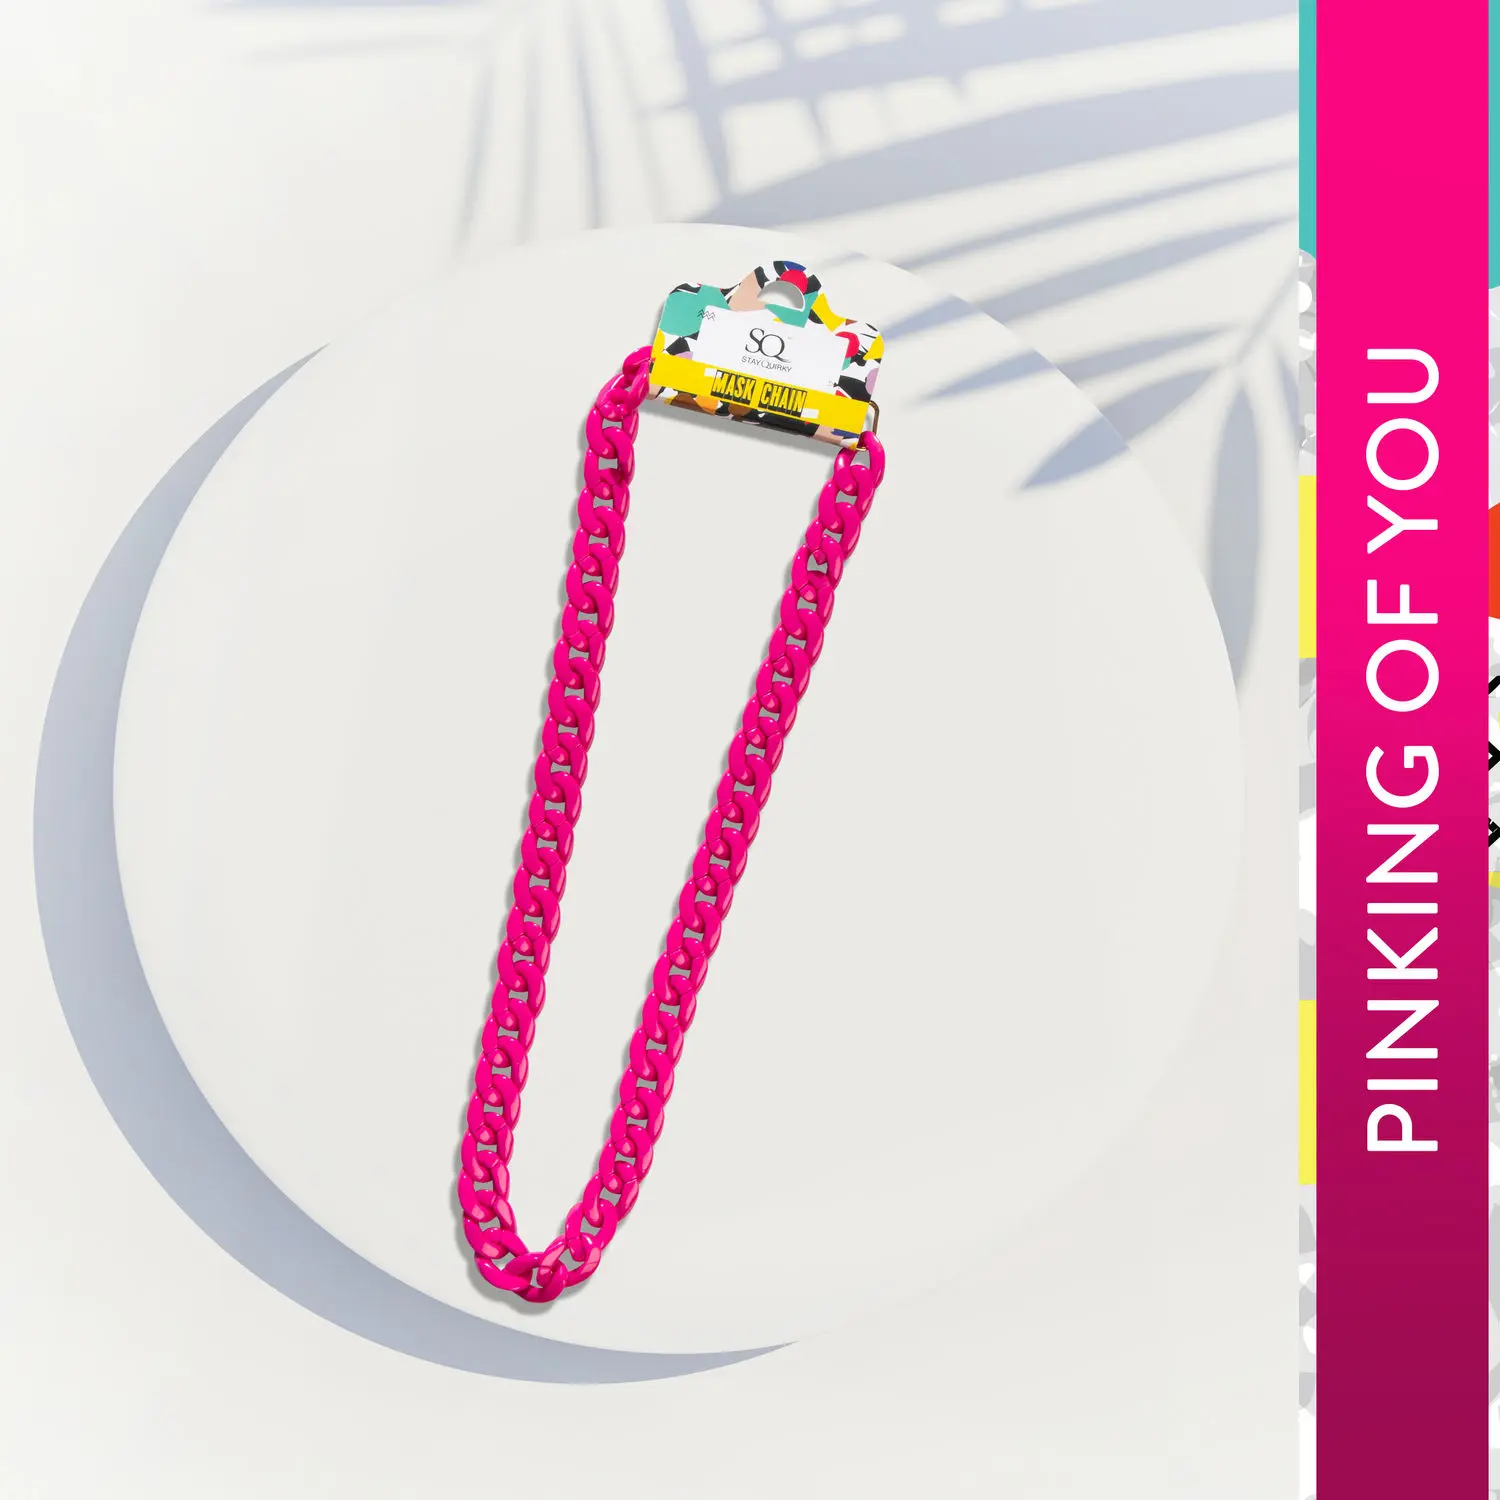 En-chain-ting Mask Chains by Stay Quirky - Pinking Of You